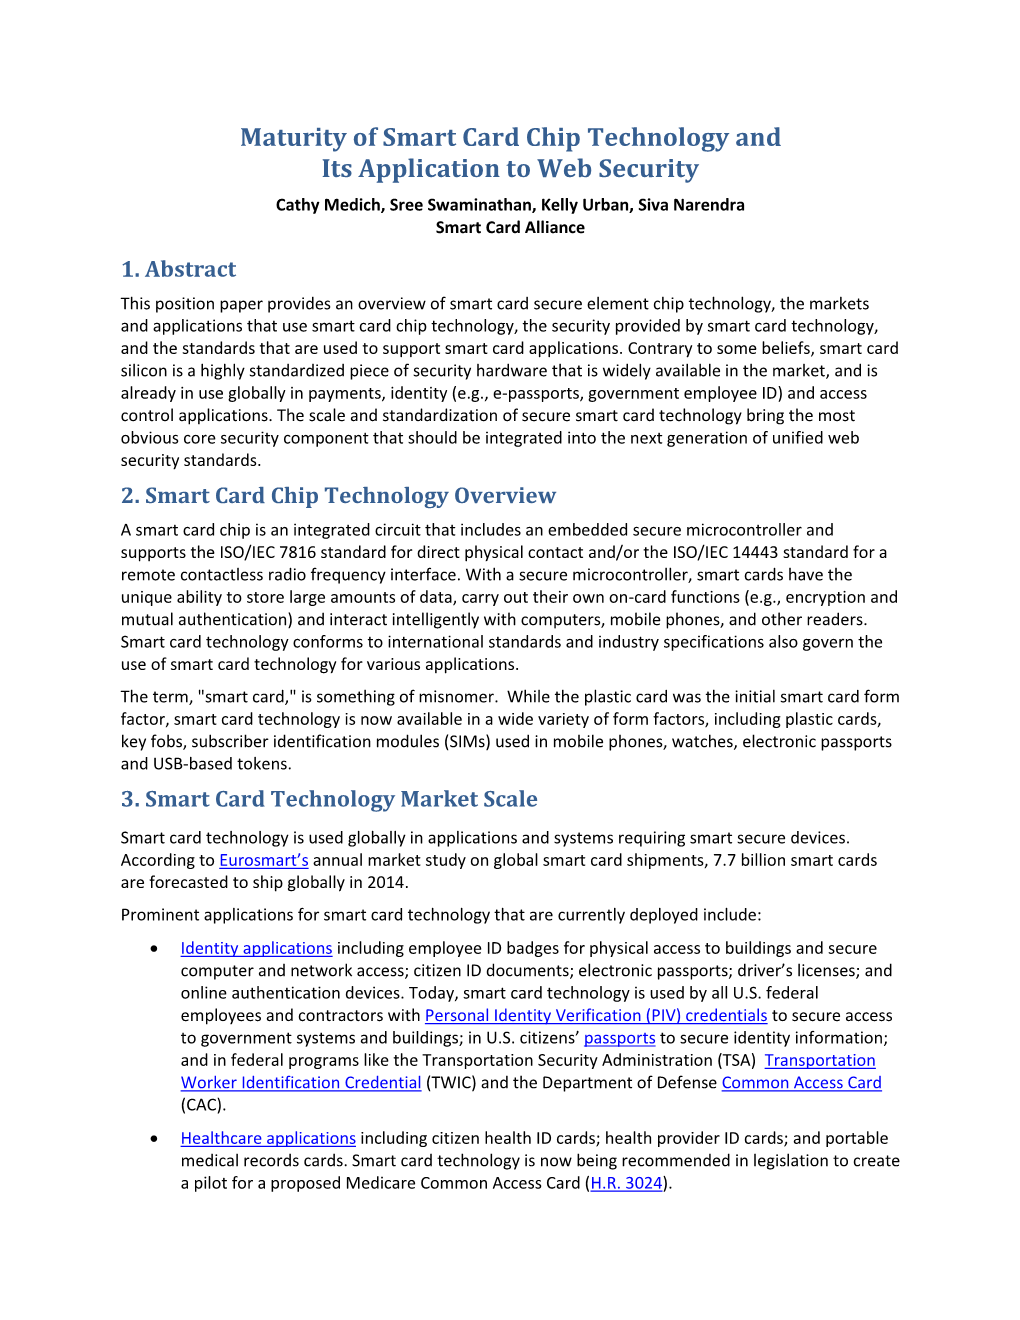 Maturity of Smart Card Chip Technology and Its Application to Web Security Cathy Medich, Sree Swaminathan, Kelly Urban, Siva Narendra Smart Card Alliance 1